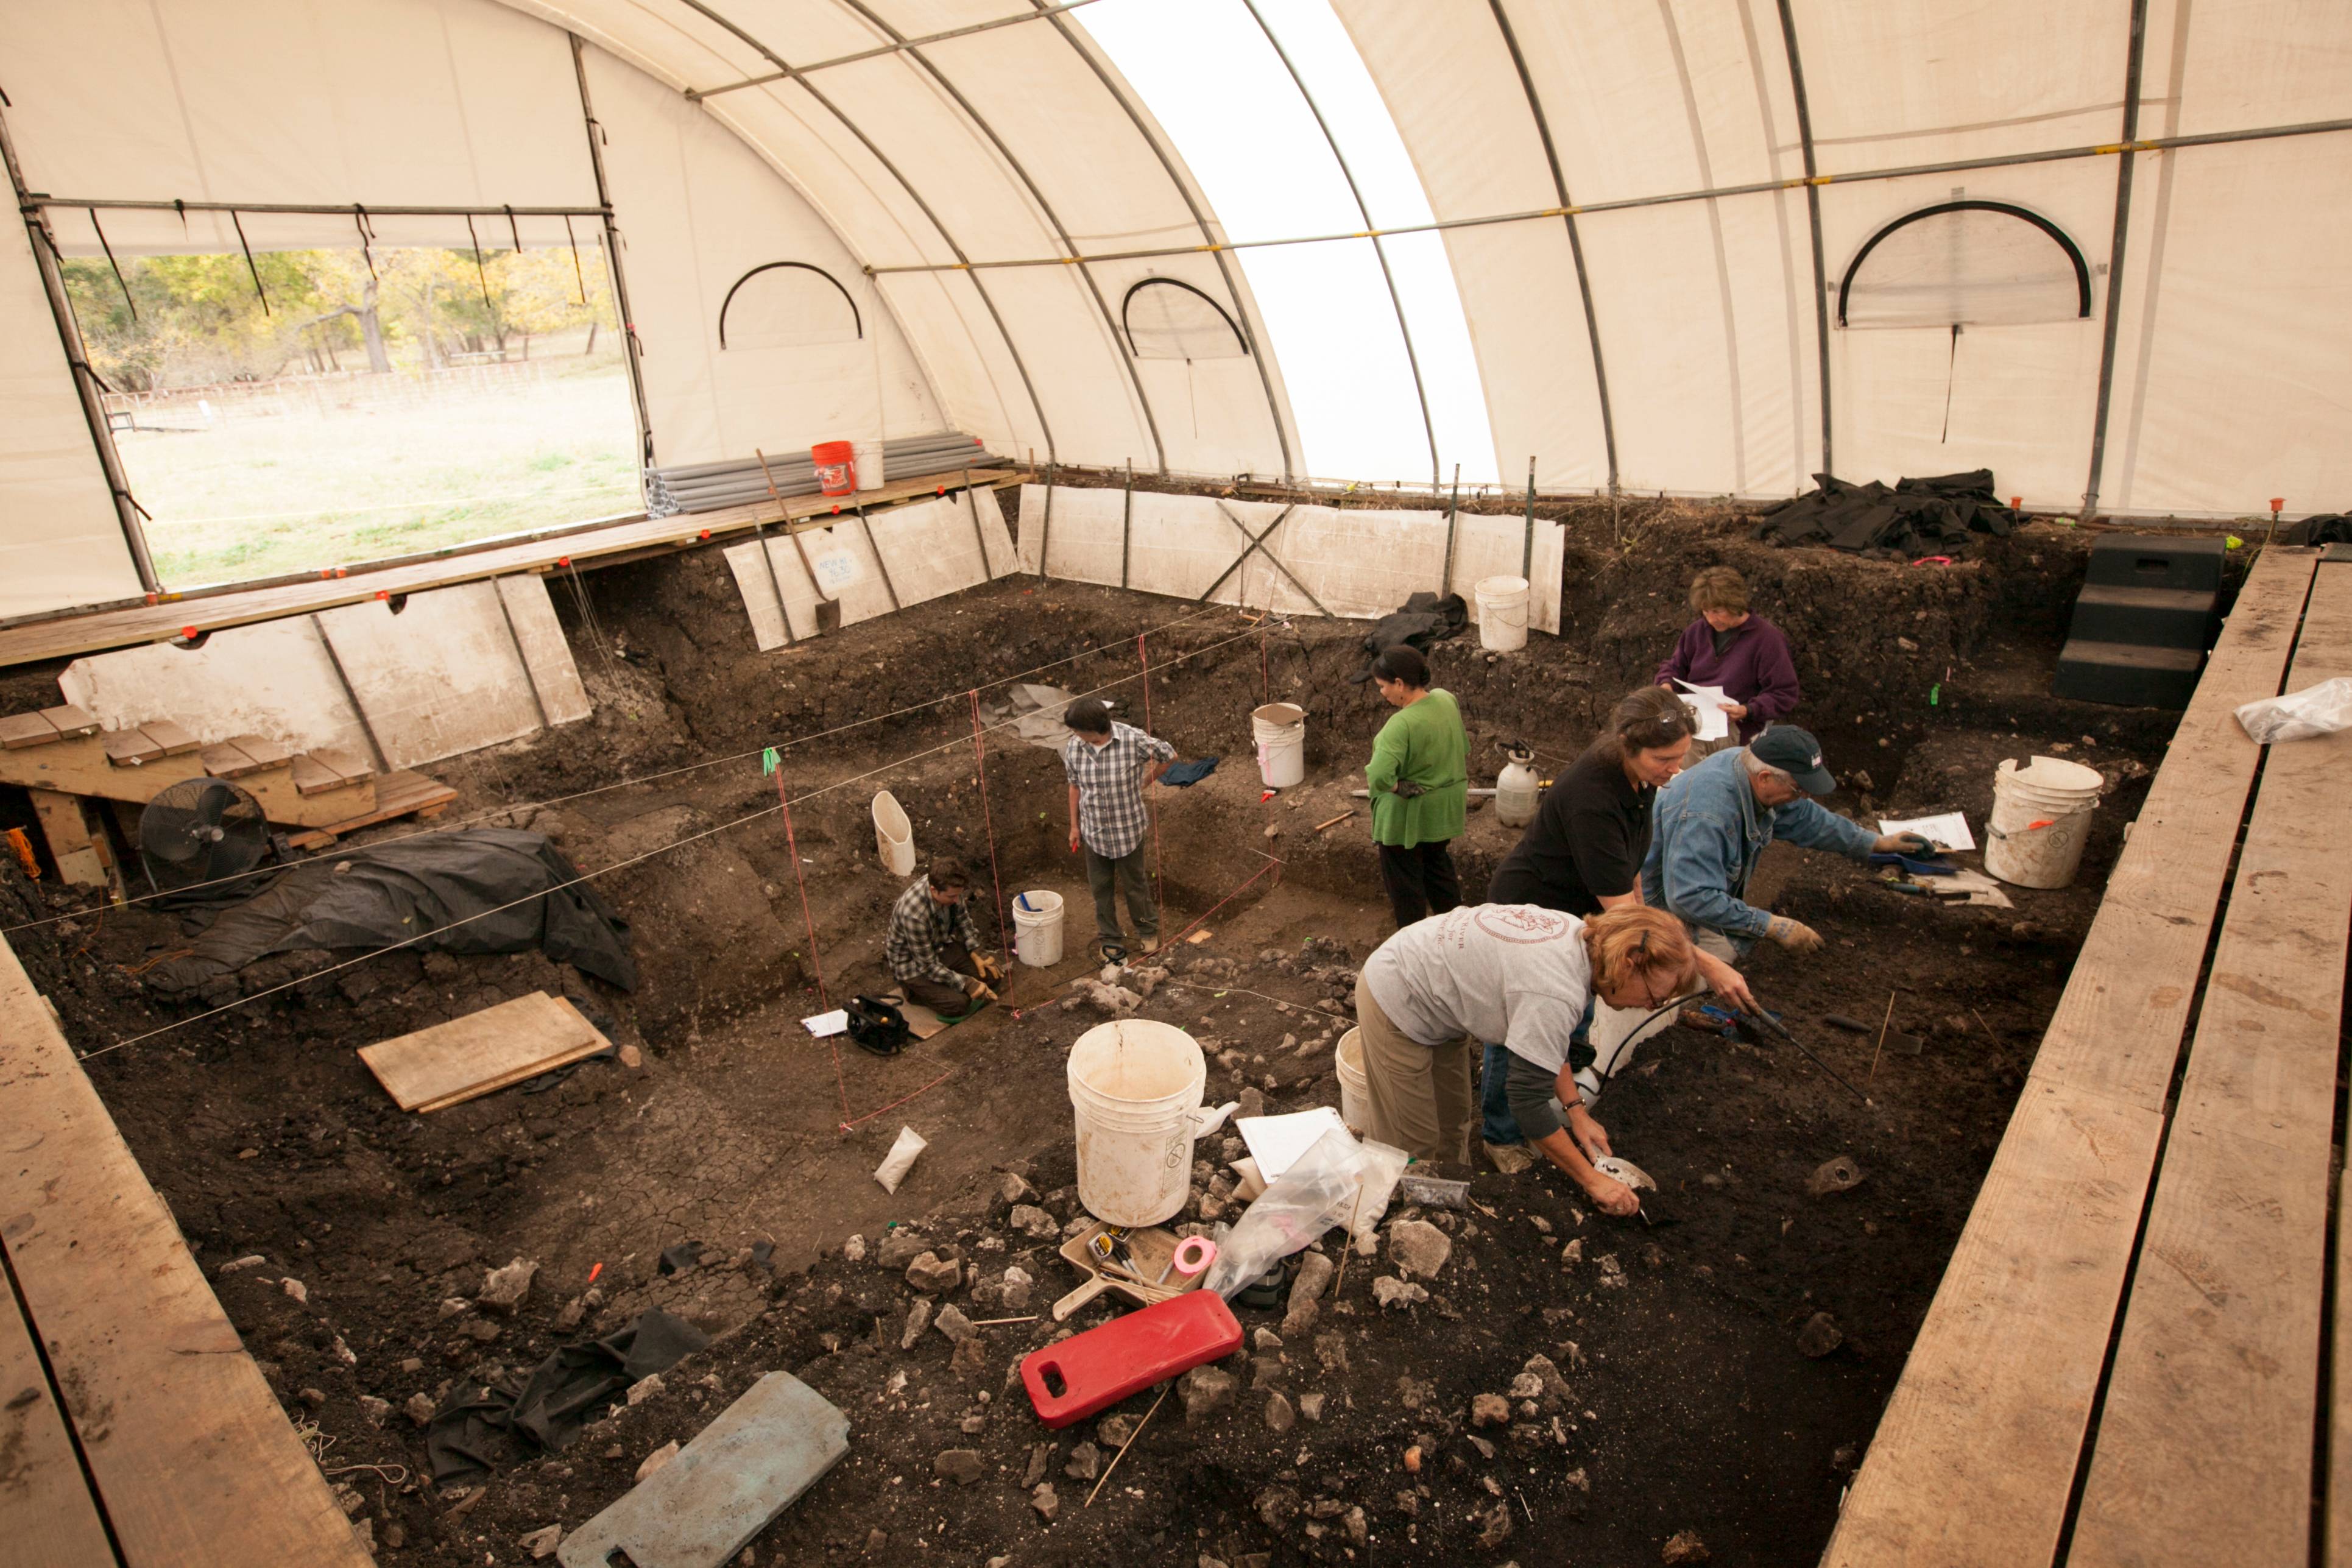 archeology site with people working